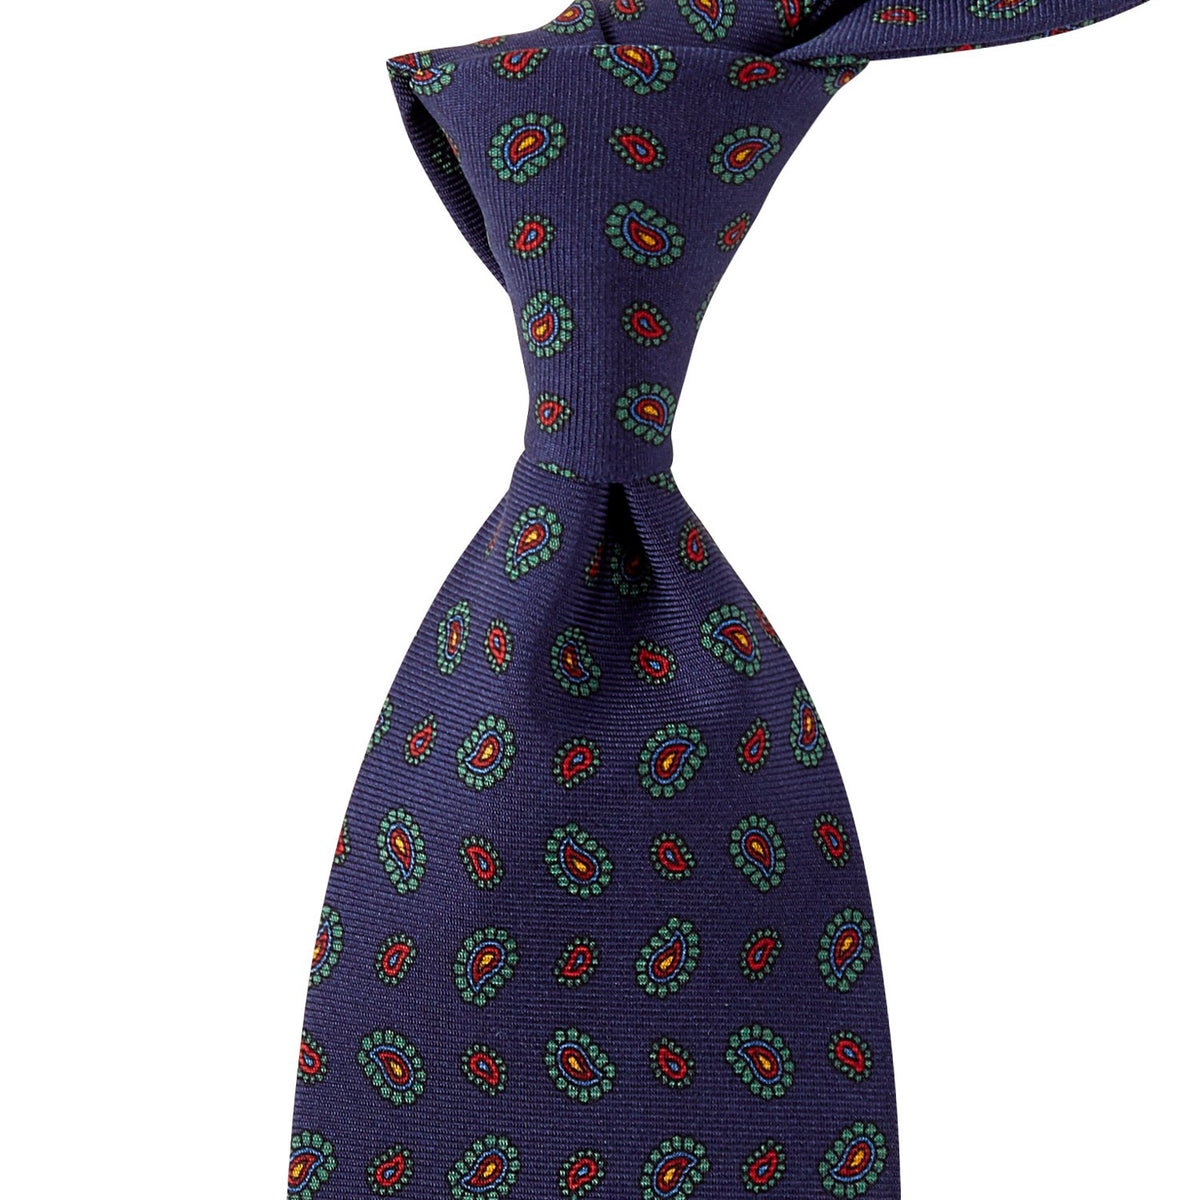 A Sovereign Grade Navy 36oz Printed Silk Paisley Tie crafted in the United Kingdom and sold by KirbyAllison.com.